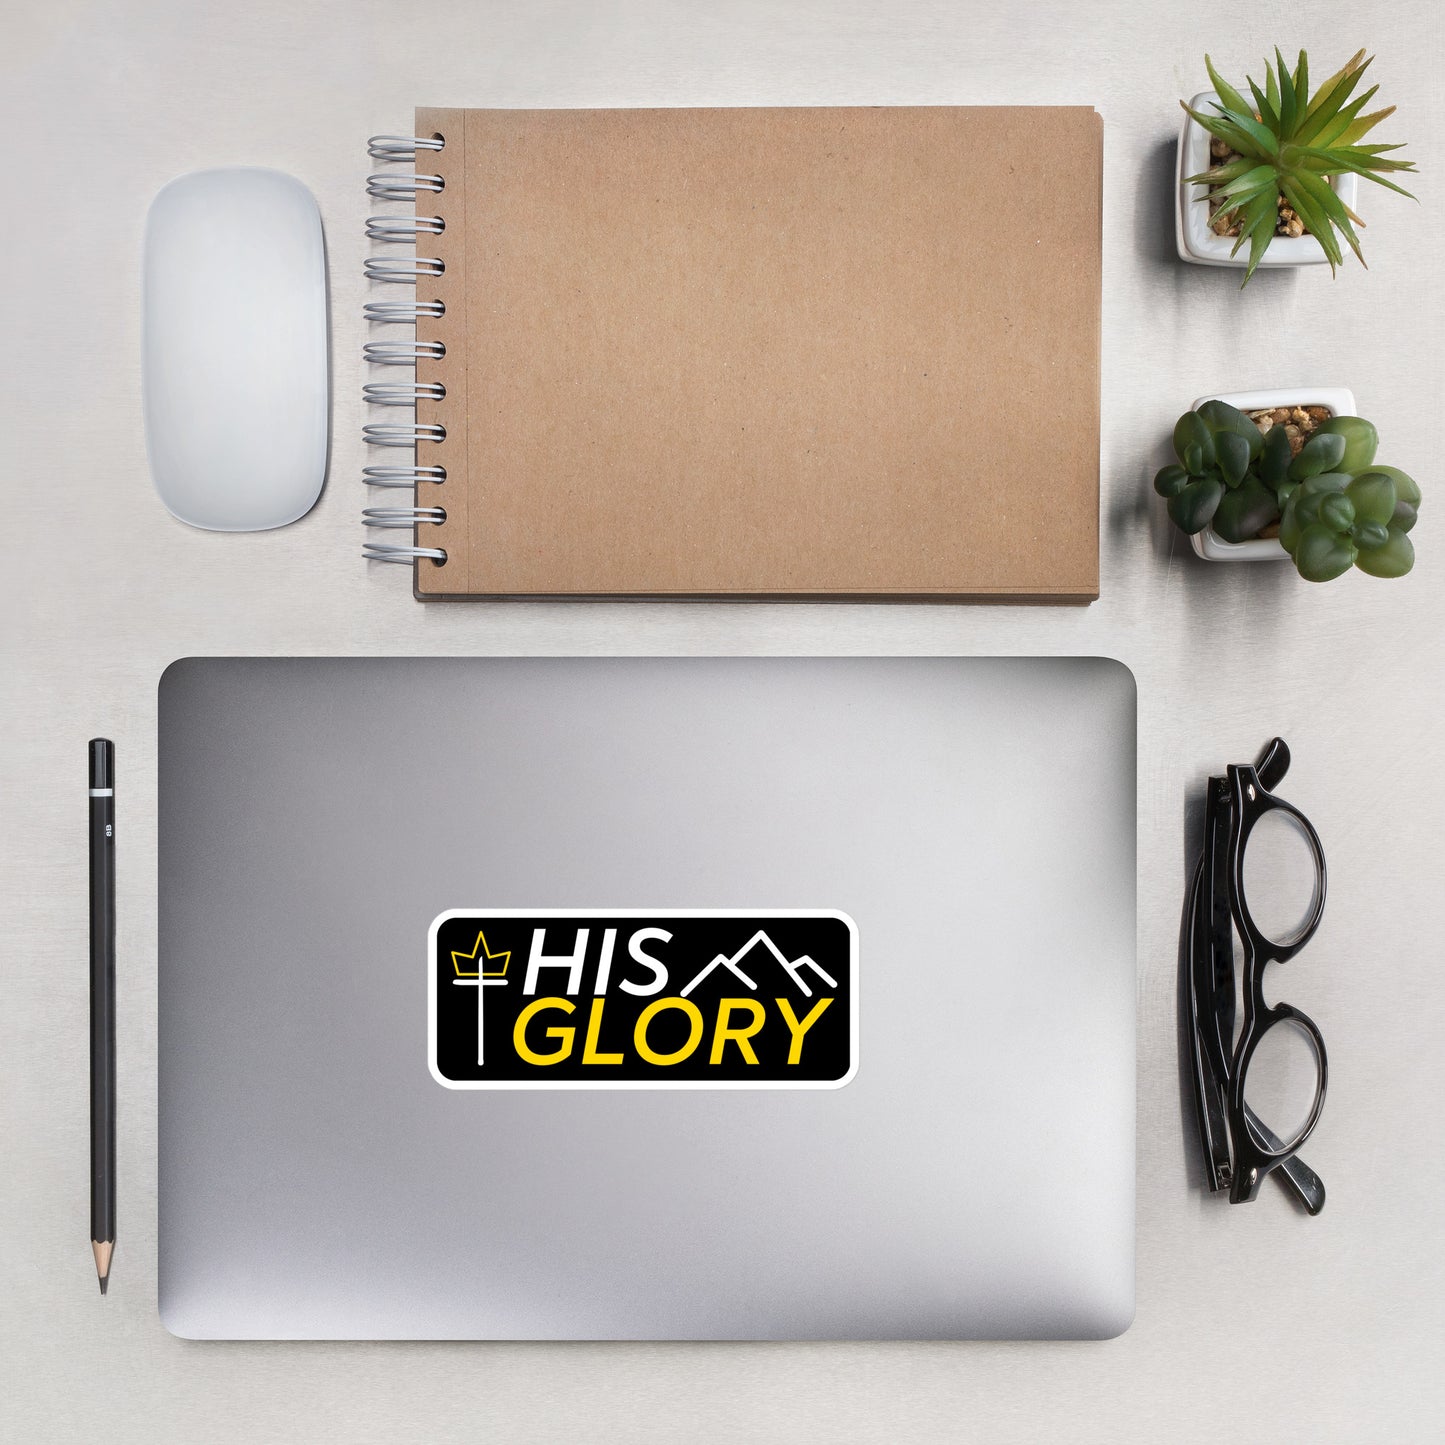 His Glory 3.0 - NEW - Bubble-free stickers